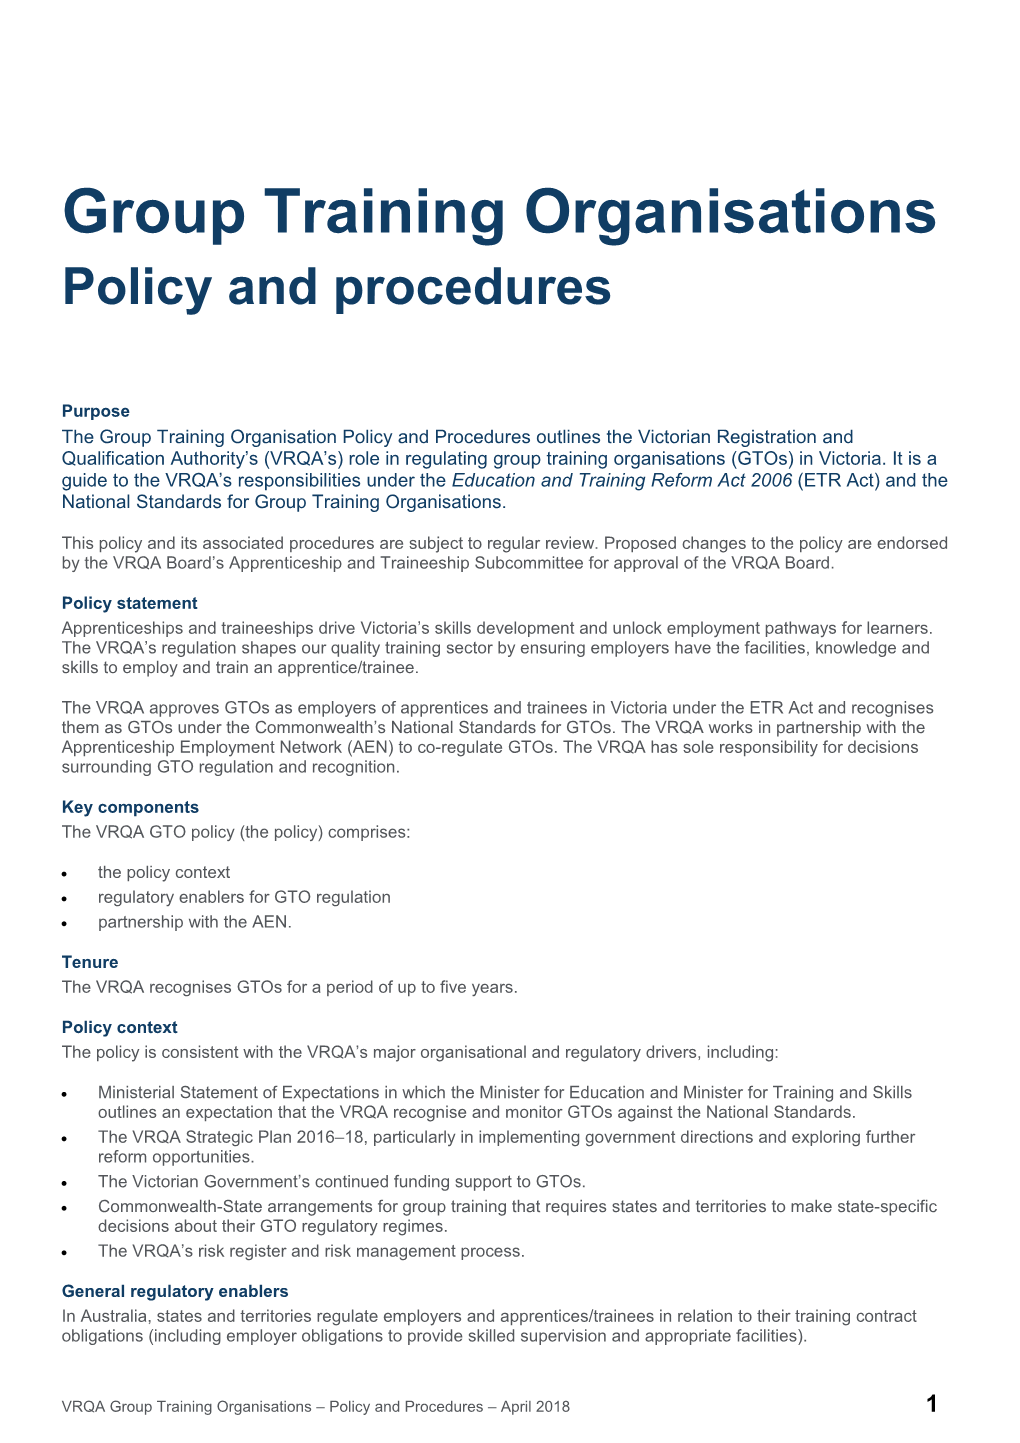 Group Training Organisation (GTO) Policy and Procedures